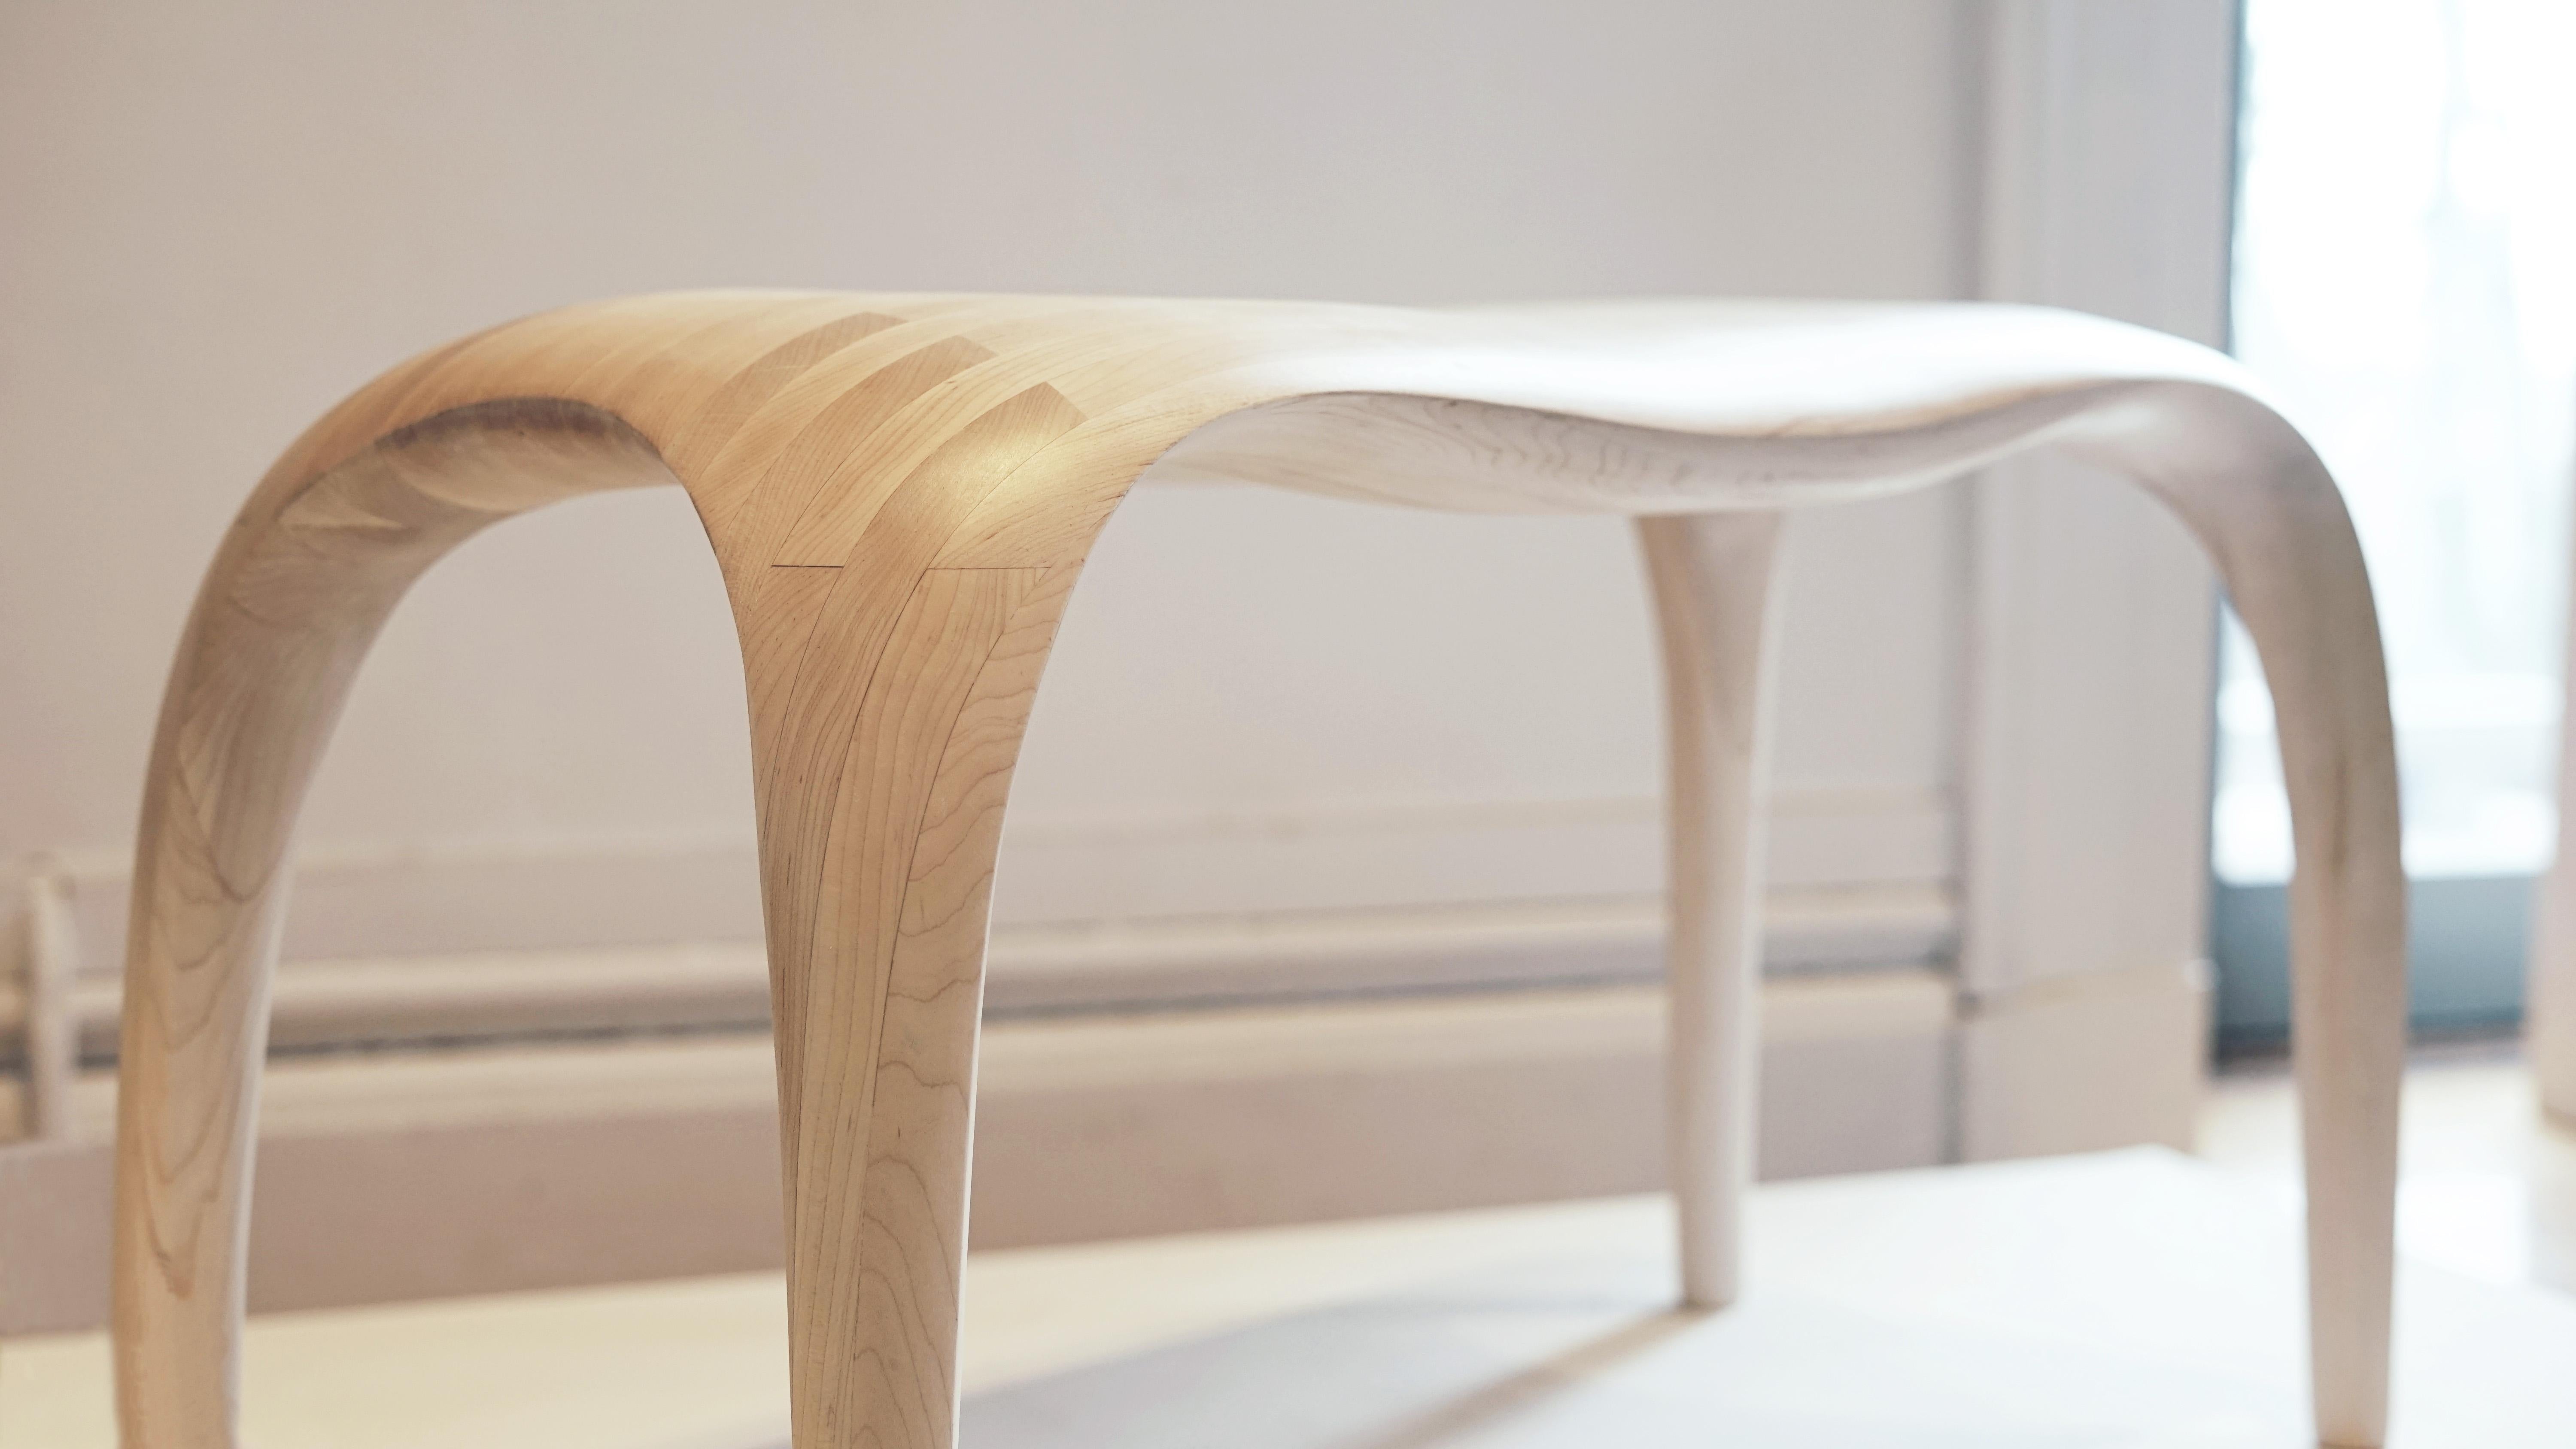 Sculptural Bench in wood - 'Gravity Bench' by Soo Joo In New Condition For Sale In New York, NY